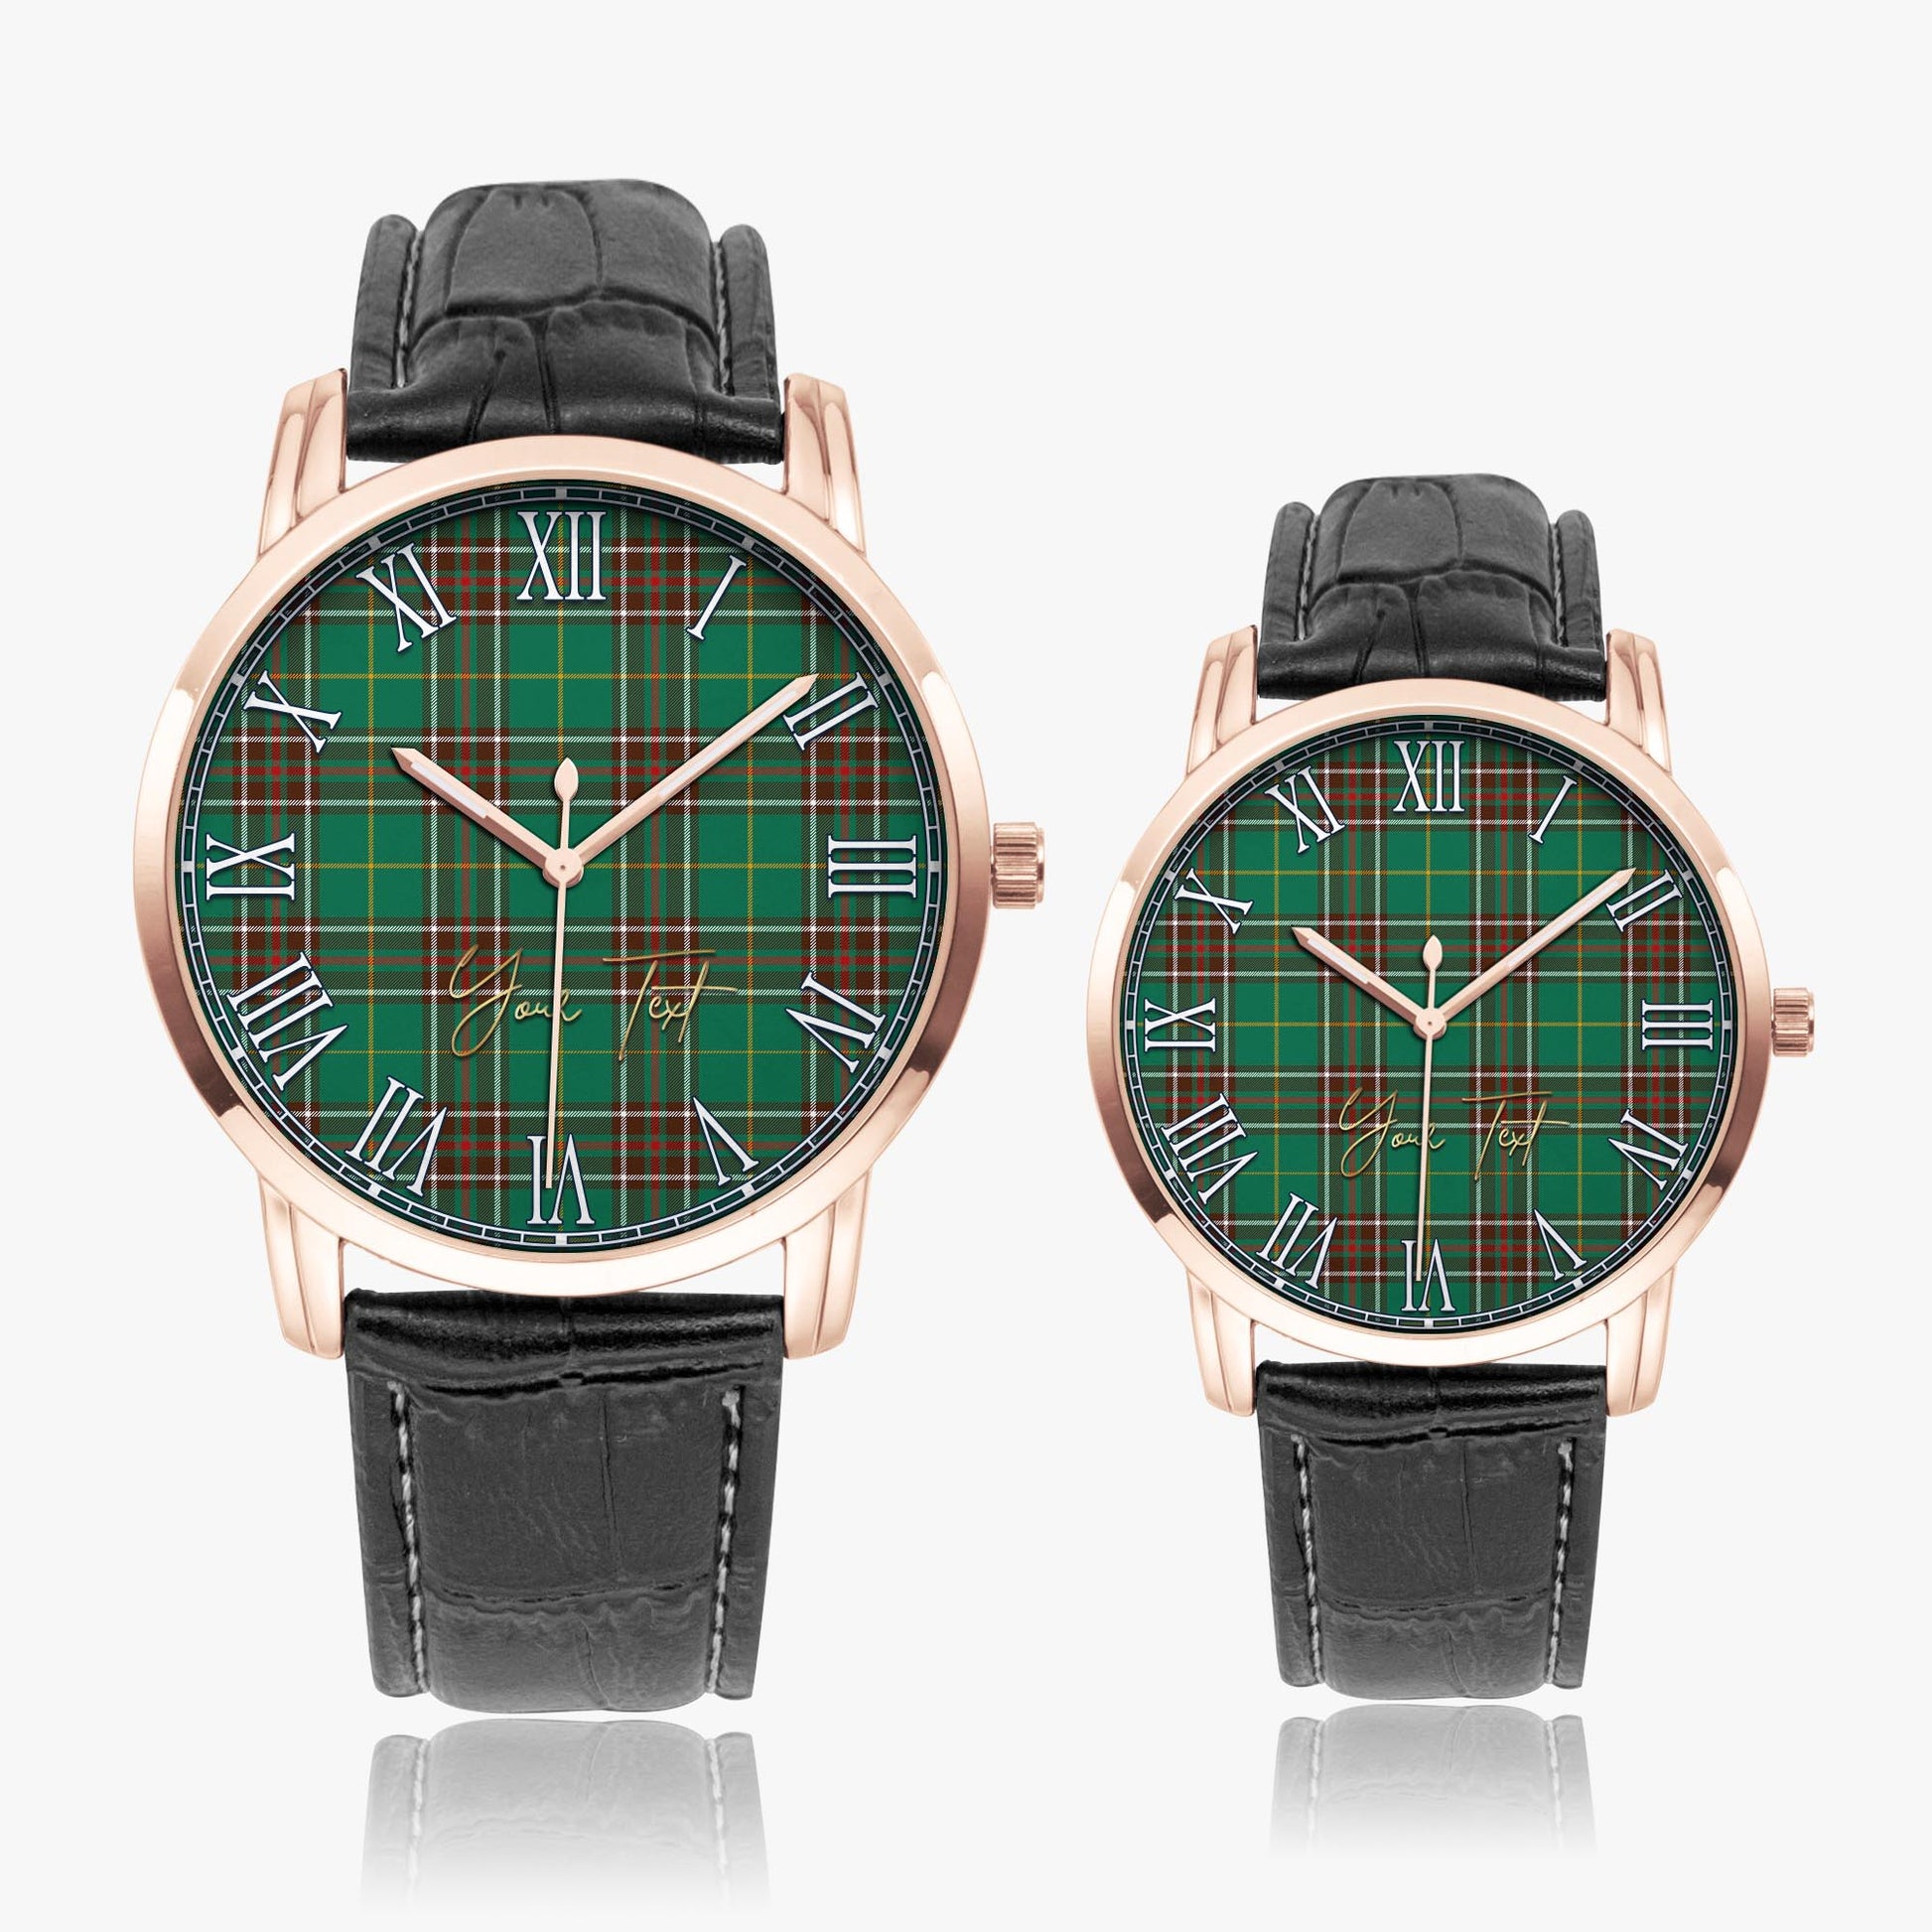 Newfoundland And Labrador Province Canada Tartan Personalized Your Text Leather Trap Quartz Watch Wide Type Rose Gold Case With Black Leather Strap - Tartanvibesclothing